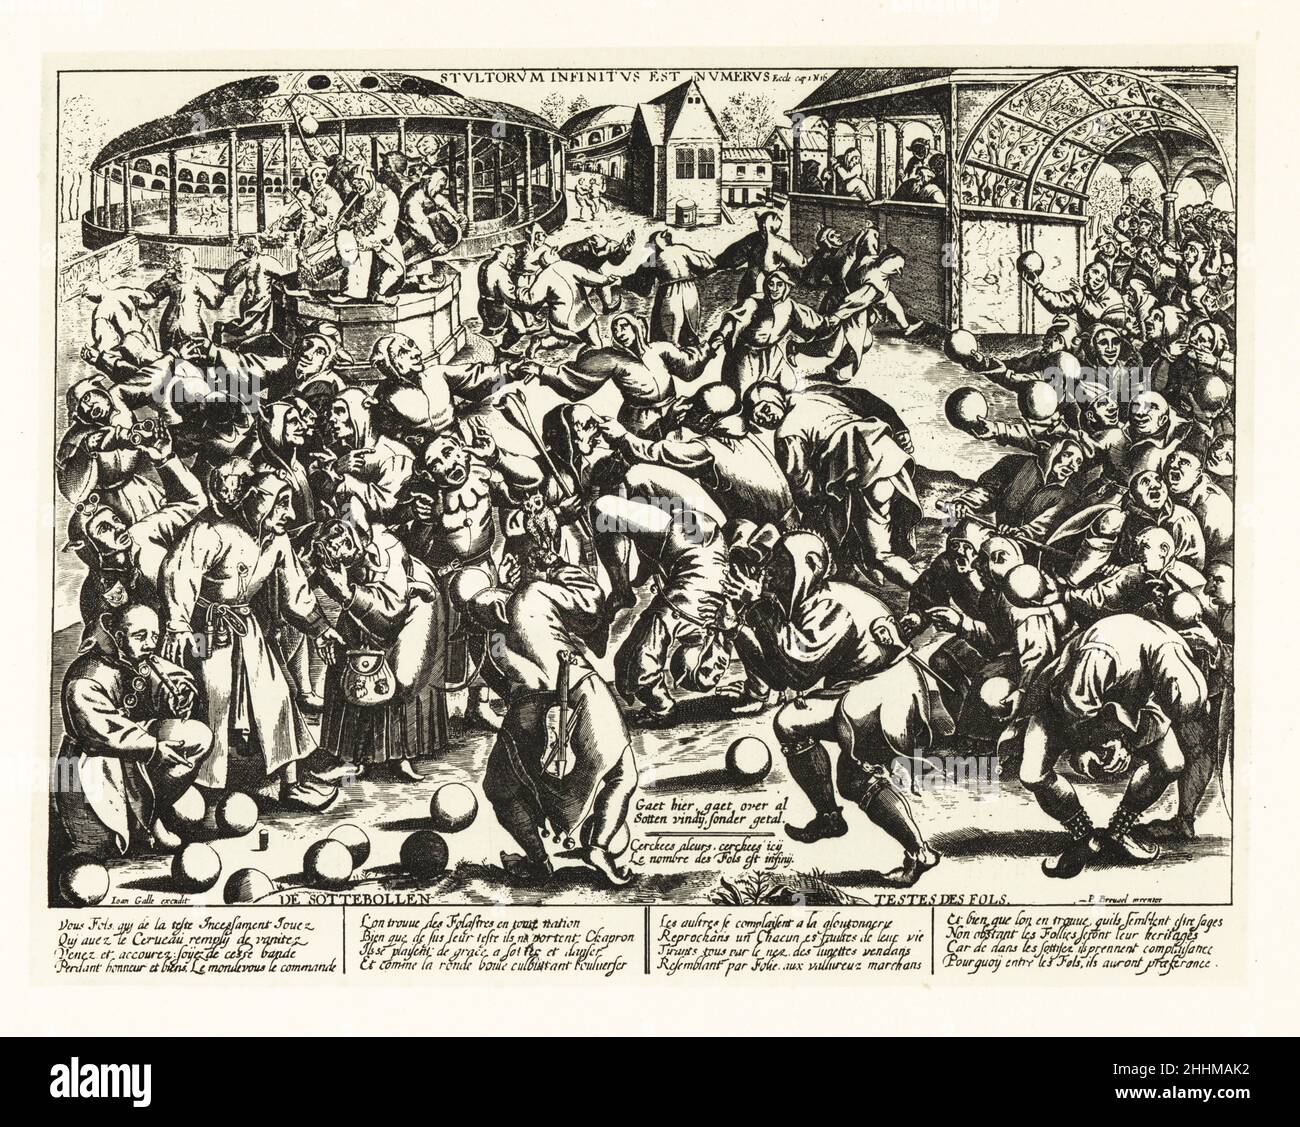 A festival of fools, Middle Ages. A large crowd of fools in hoods with ears and cockscombs dancing, tumbling, pulling each others noses, playing ball games, beating drums. Infinite is the number of fools. Stultorum infinitus est numerus, Ecclesiastes. Lithograph after an engraving by Jean Galle after Pieter Bruegel the Elder from Henry Rene d’Allemagne’s Recreations et Passe-Temps, Games and Pastimes, Hachette, Paris, 1906. Stock Photo